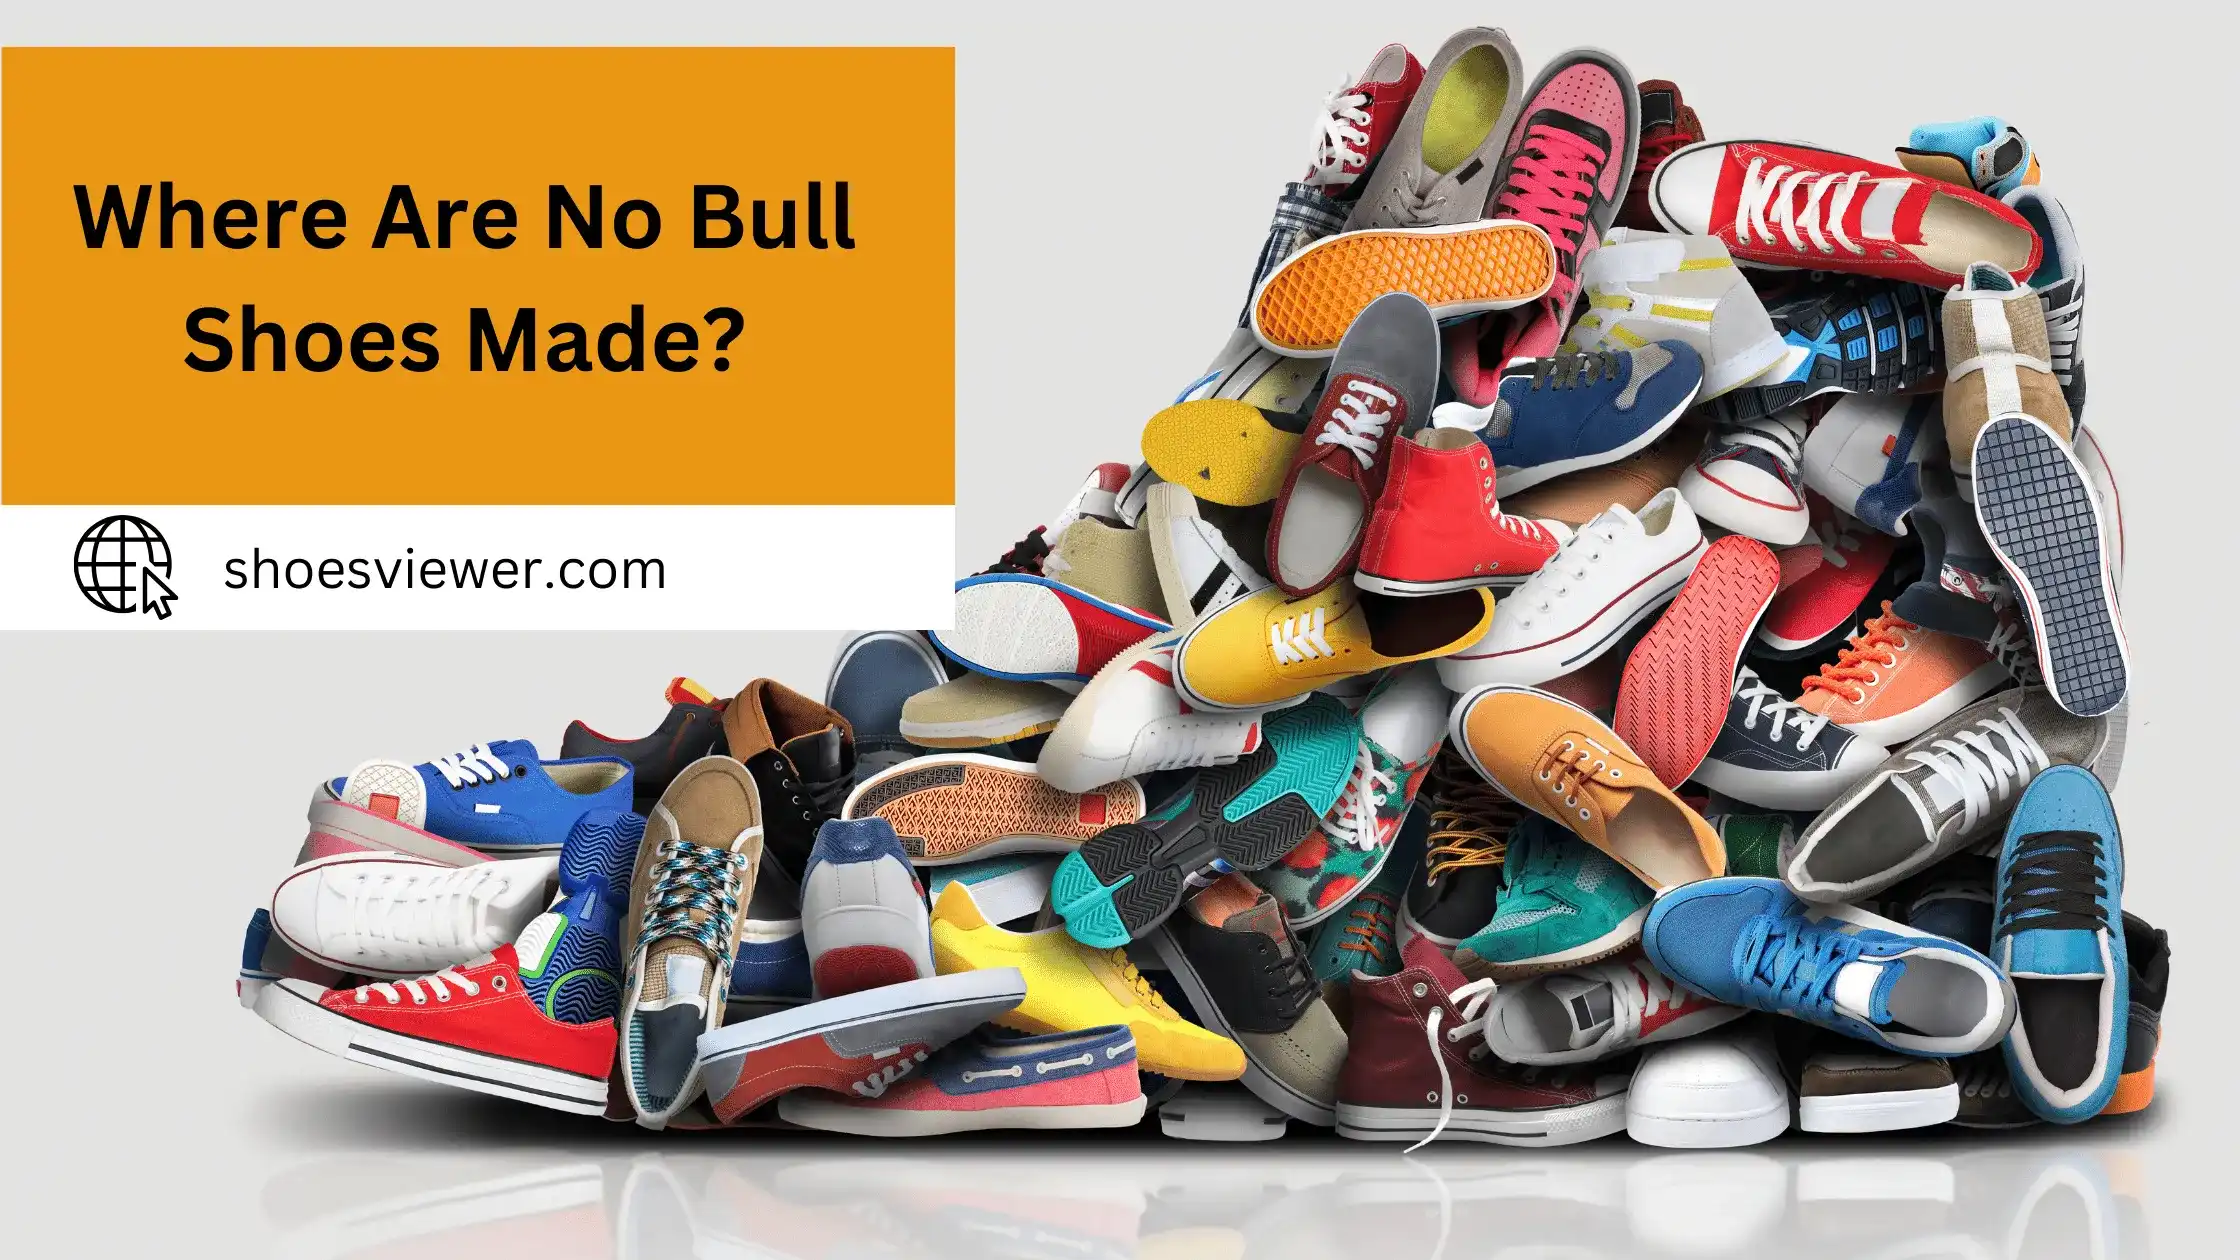 Where Are No Bull Shoes Made? Detailed Information